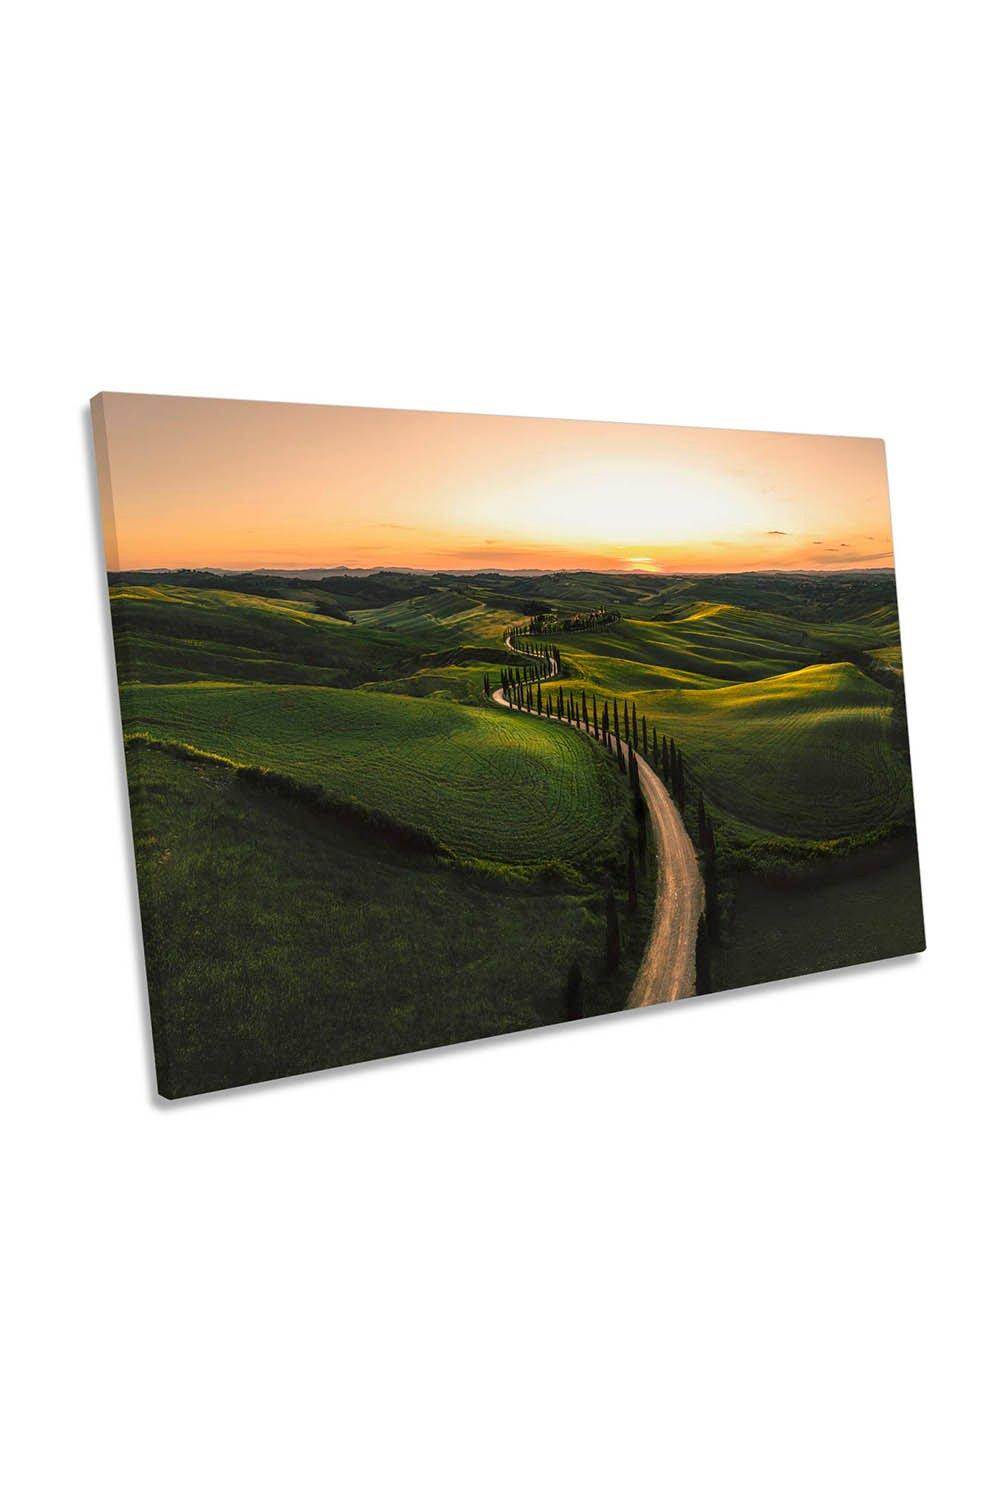 Tuscan Dream Valley Tuscany Sunset Canvas Wall Art Picture Print